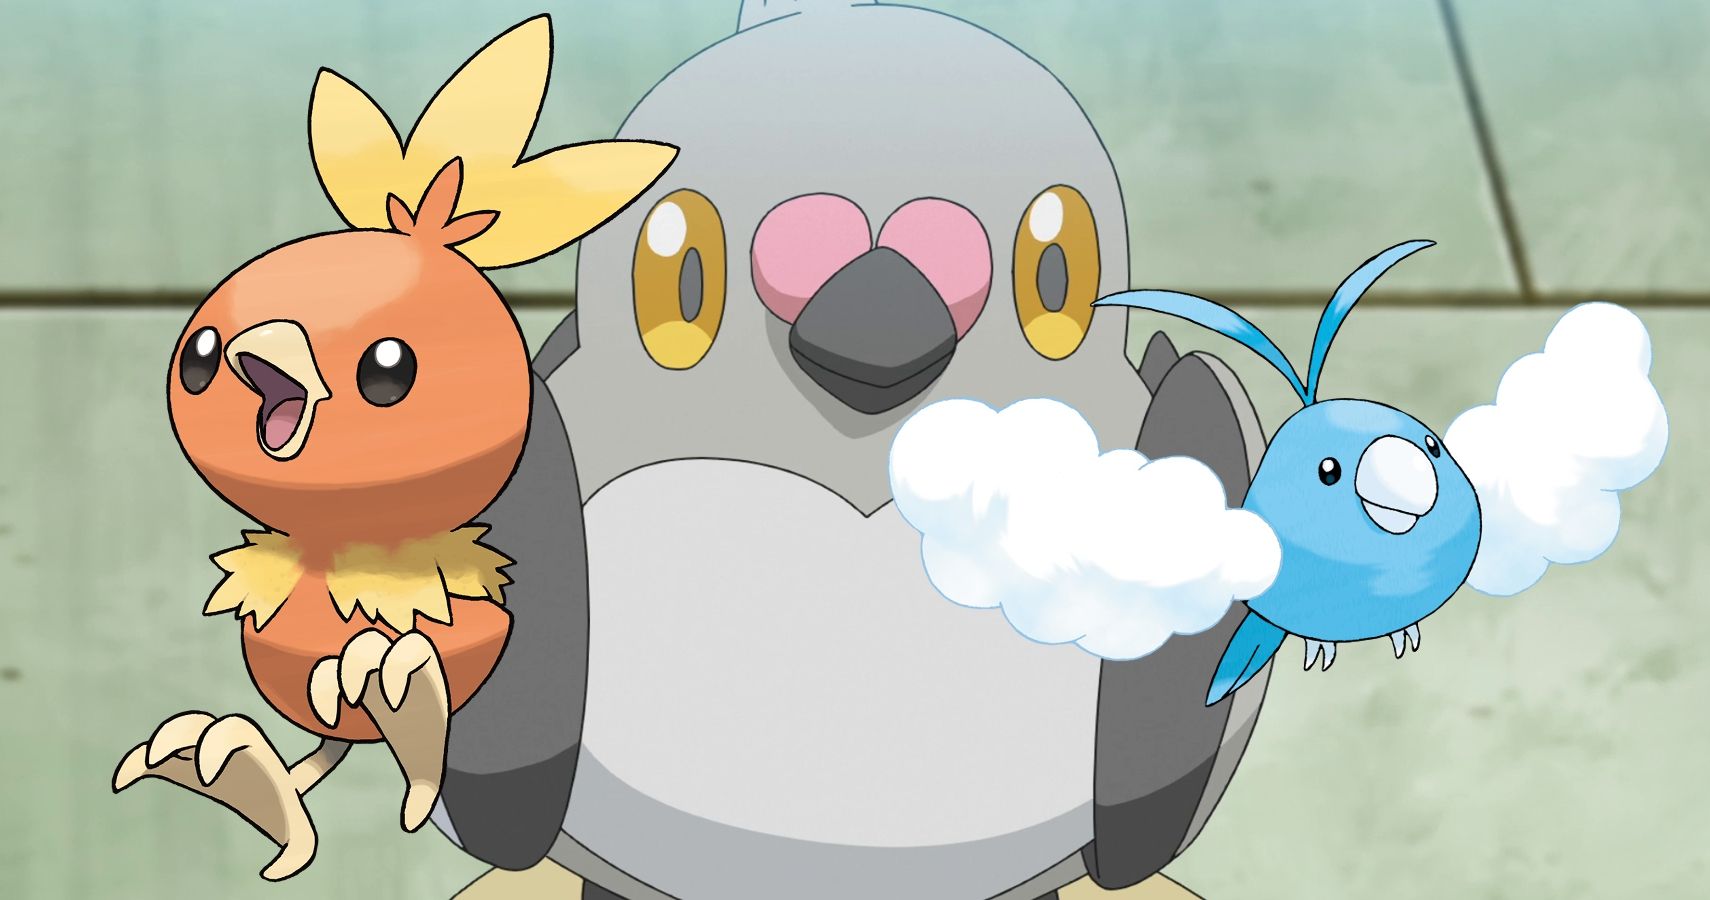 A screenshot of Pidove from the Pokemon anime with Torchic and Swablu added in next to it via photoshop